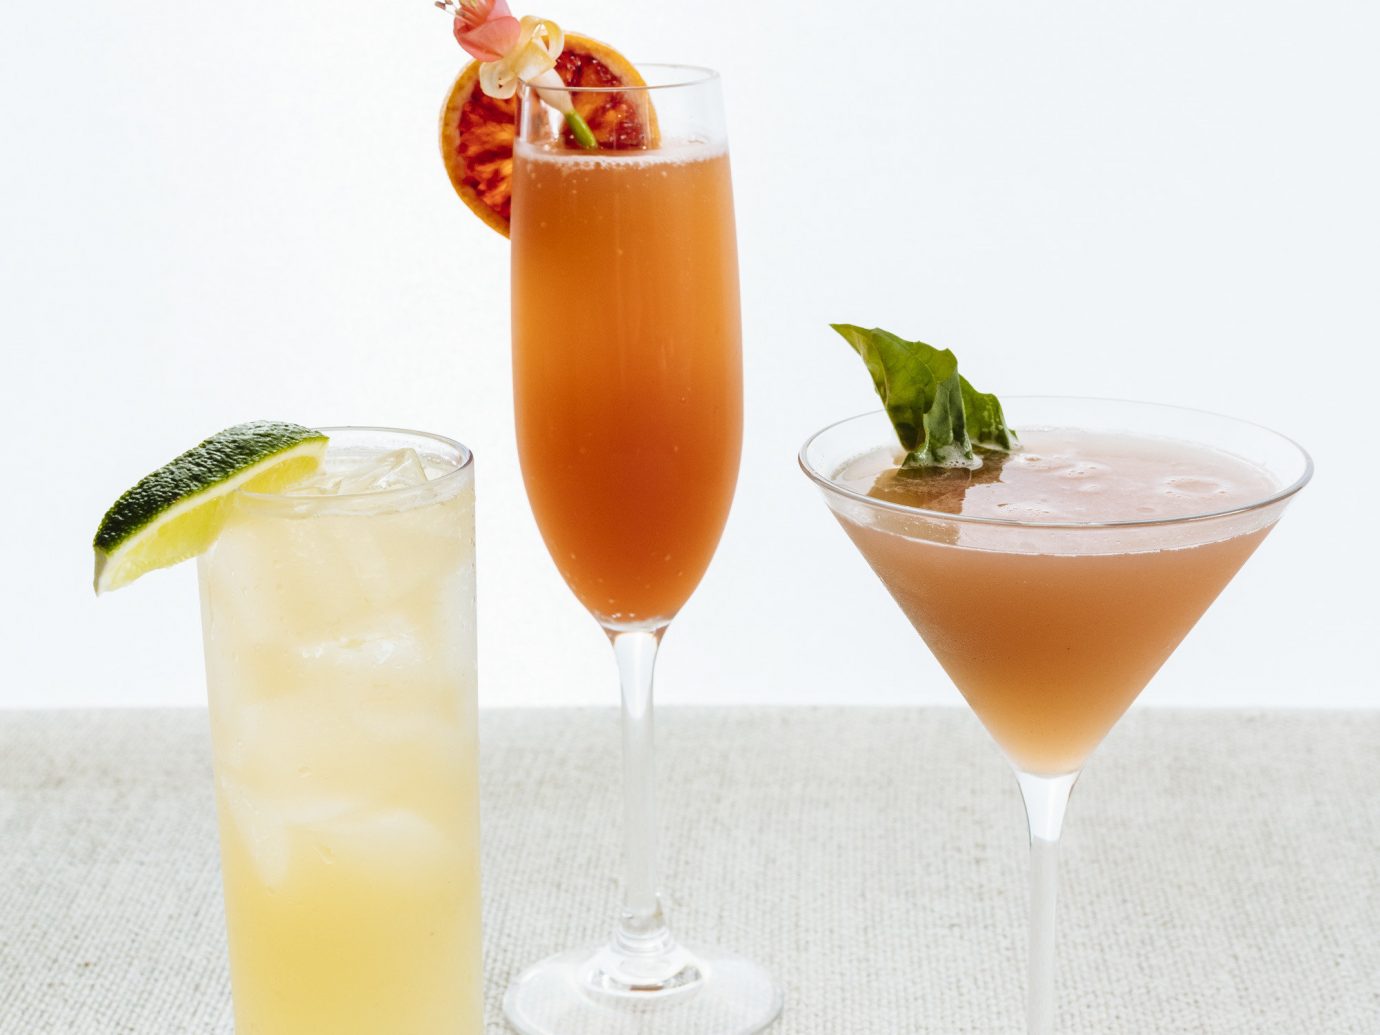 Food + Drink Girls Getaways Hotels Jetsetter Guides shopping Style + Design Weekend Getaways cup table Drink cocktail glass non alcoholic beverage cocktail garnish juice orange drink mai tai bellini harvey wallbanger wine cocktail sea breeze fuzzy navel spritzer classic cocktail champagne cocktail orange fruit drink